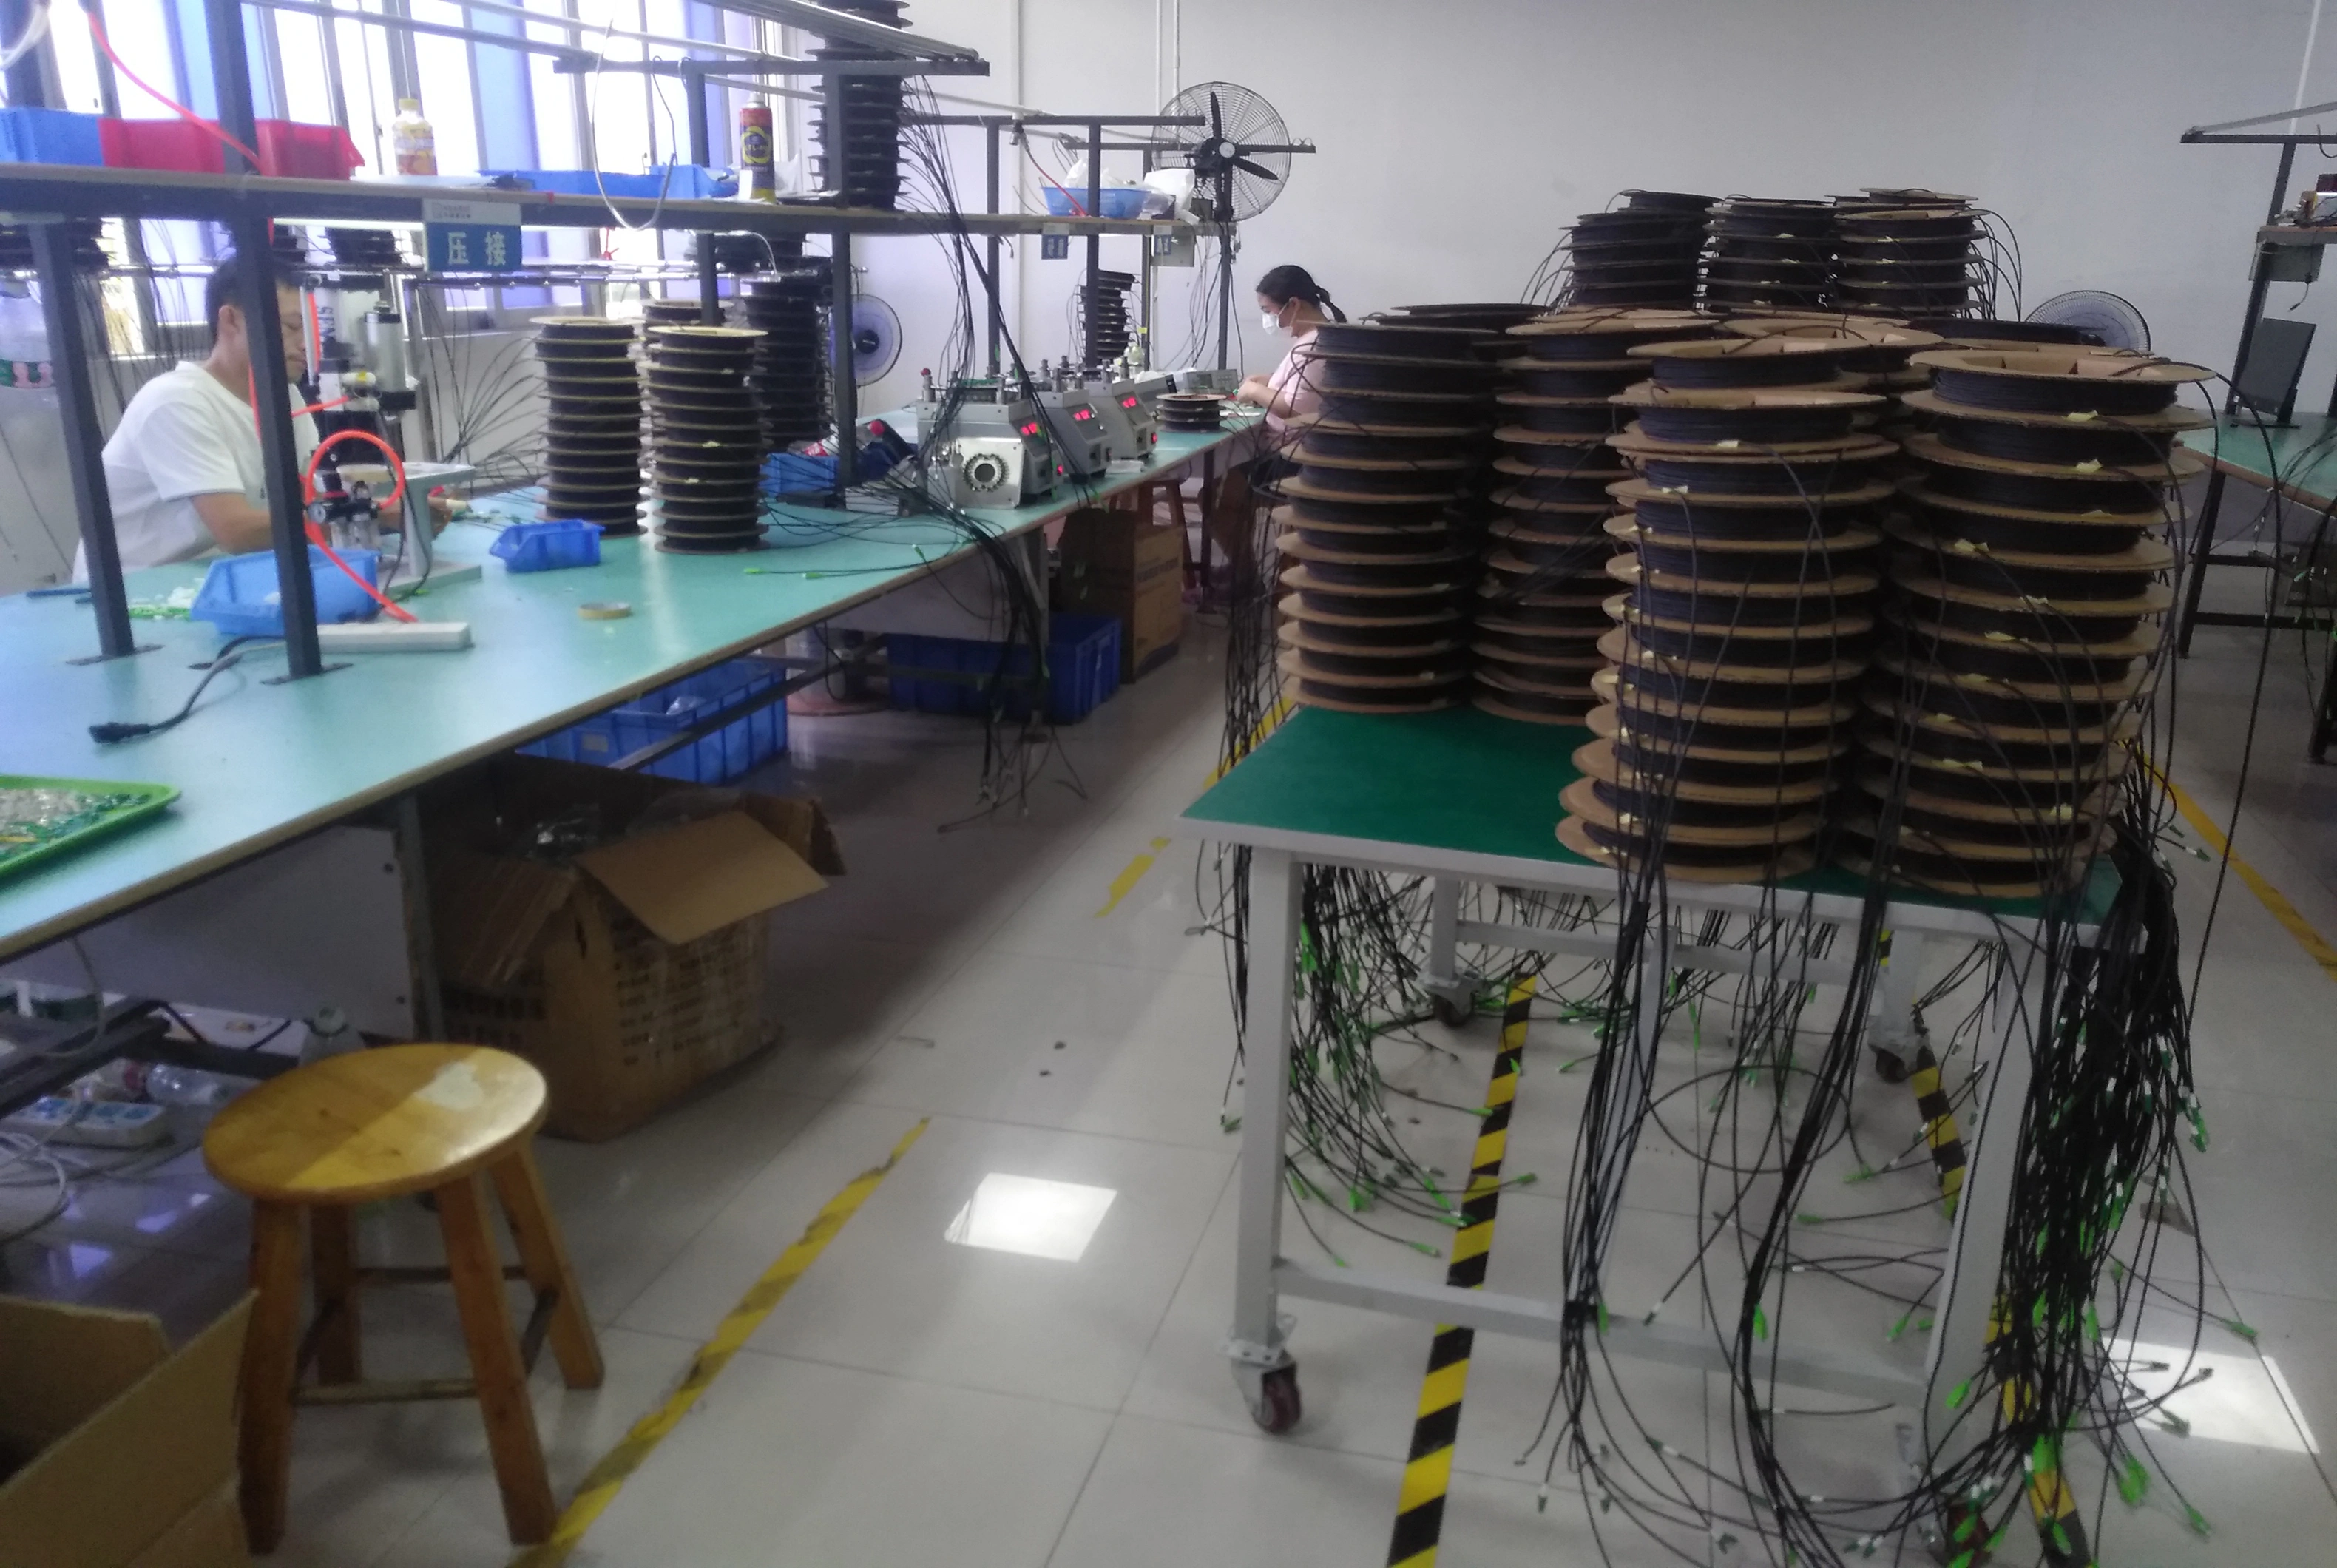 Cardboard Reel Type Packing SC APC Optic Fiber Patch Cord FTTH Drop Cable Assemblies with Pulling Eye